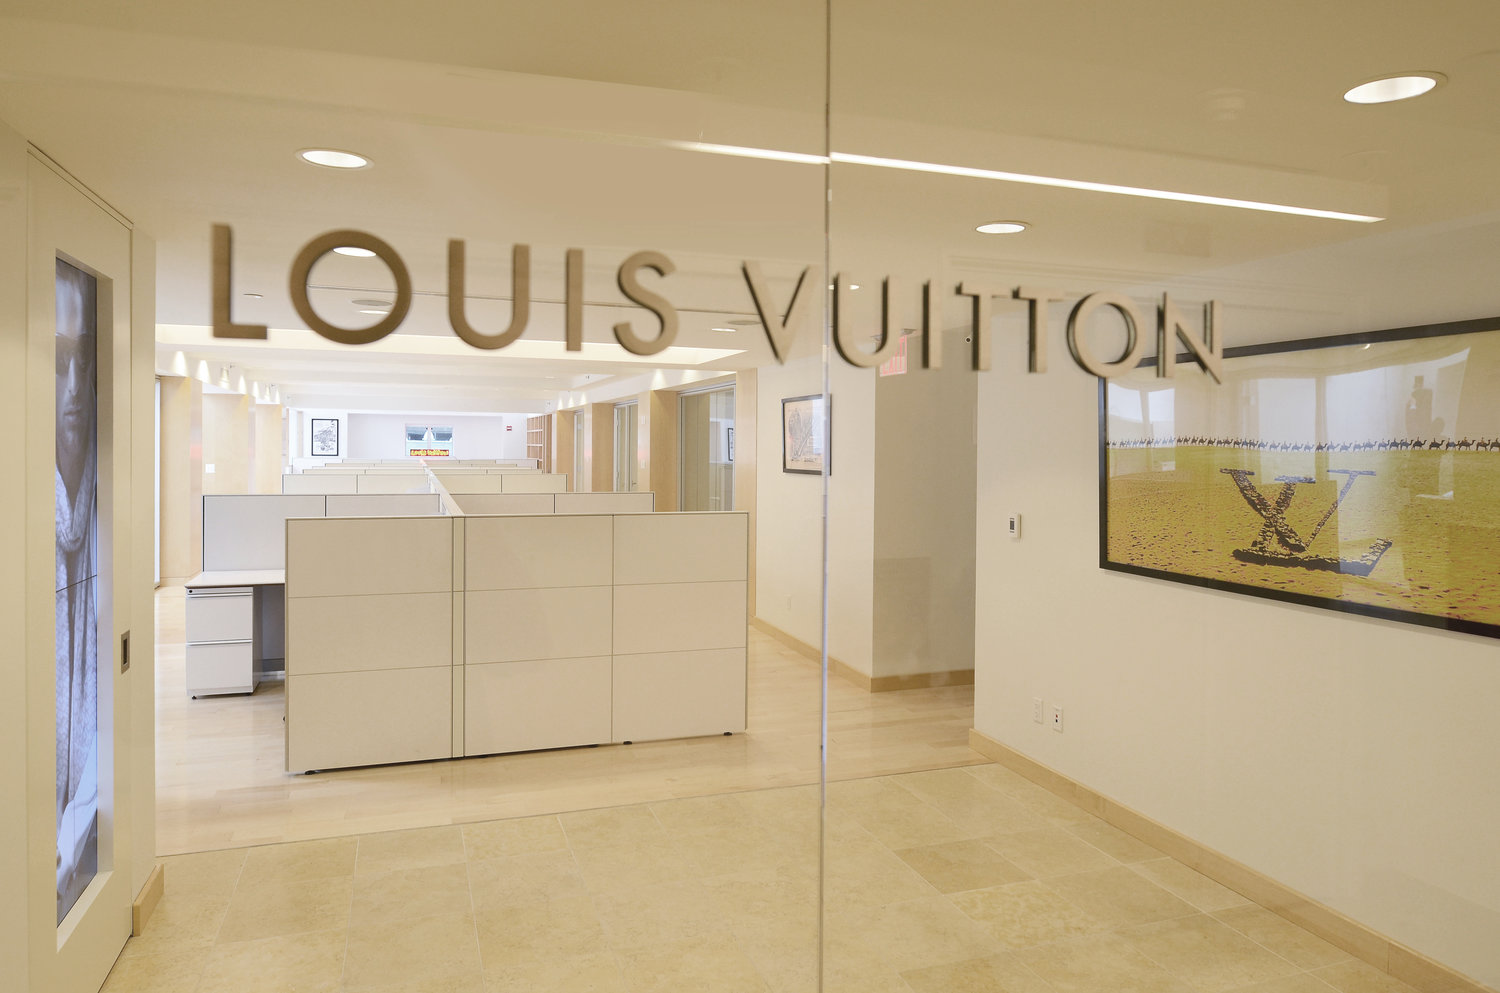 Offices  Louis Vuitton North American Headquarters